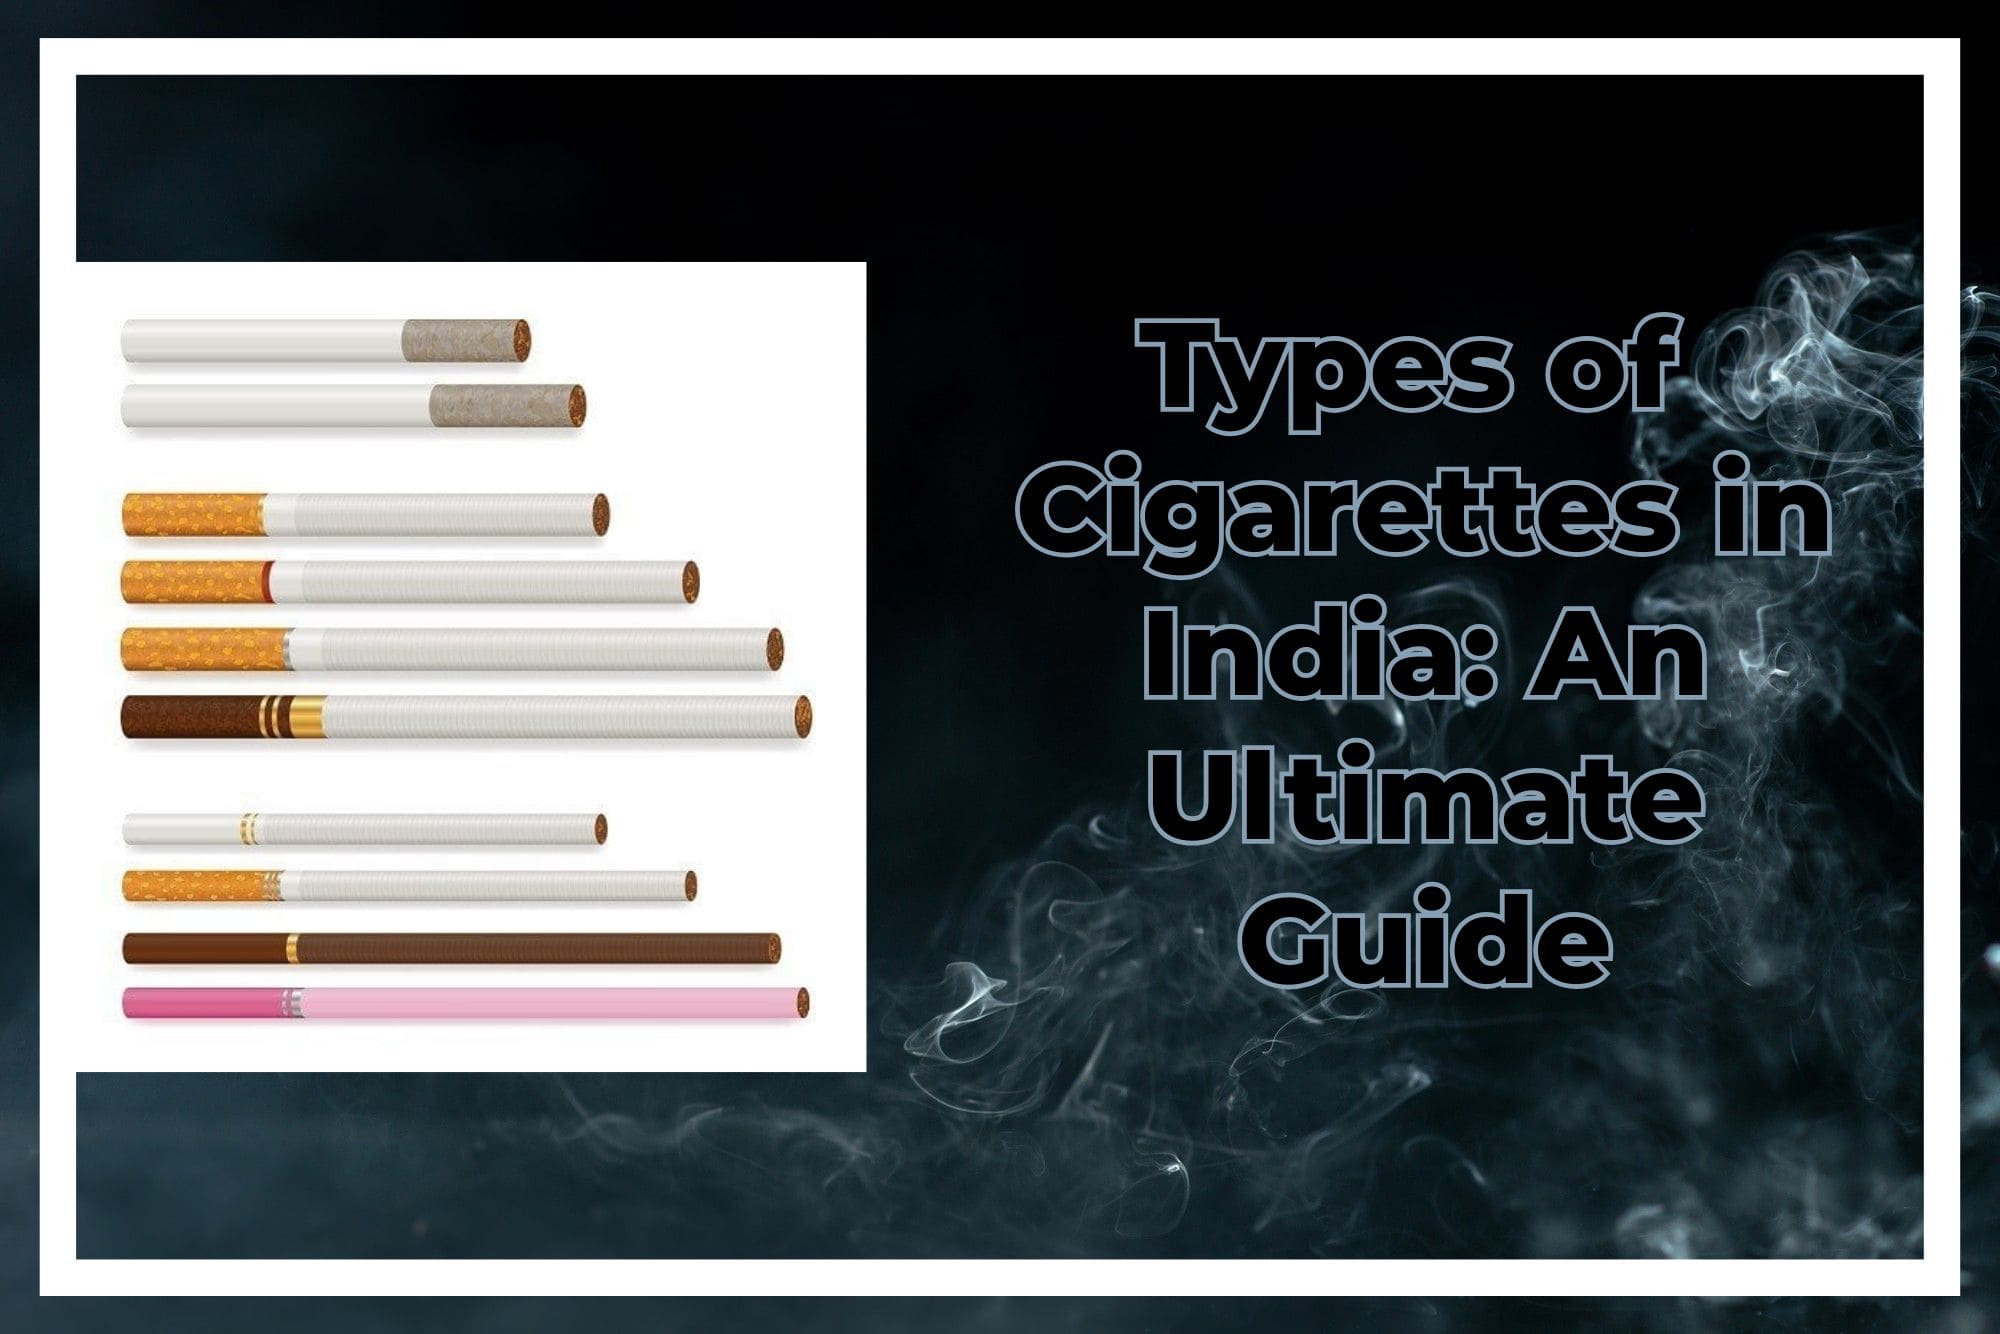 Types of Cigarettes in India